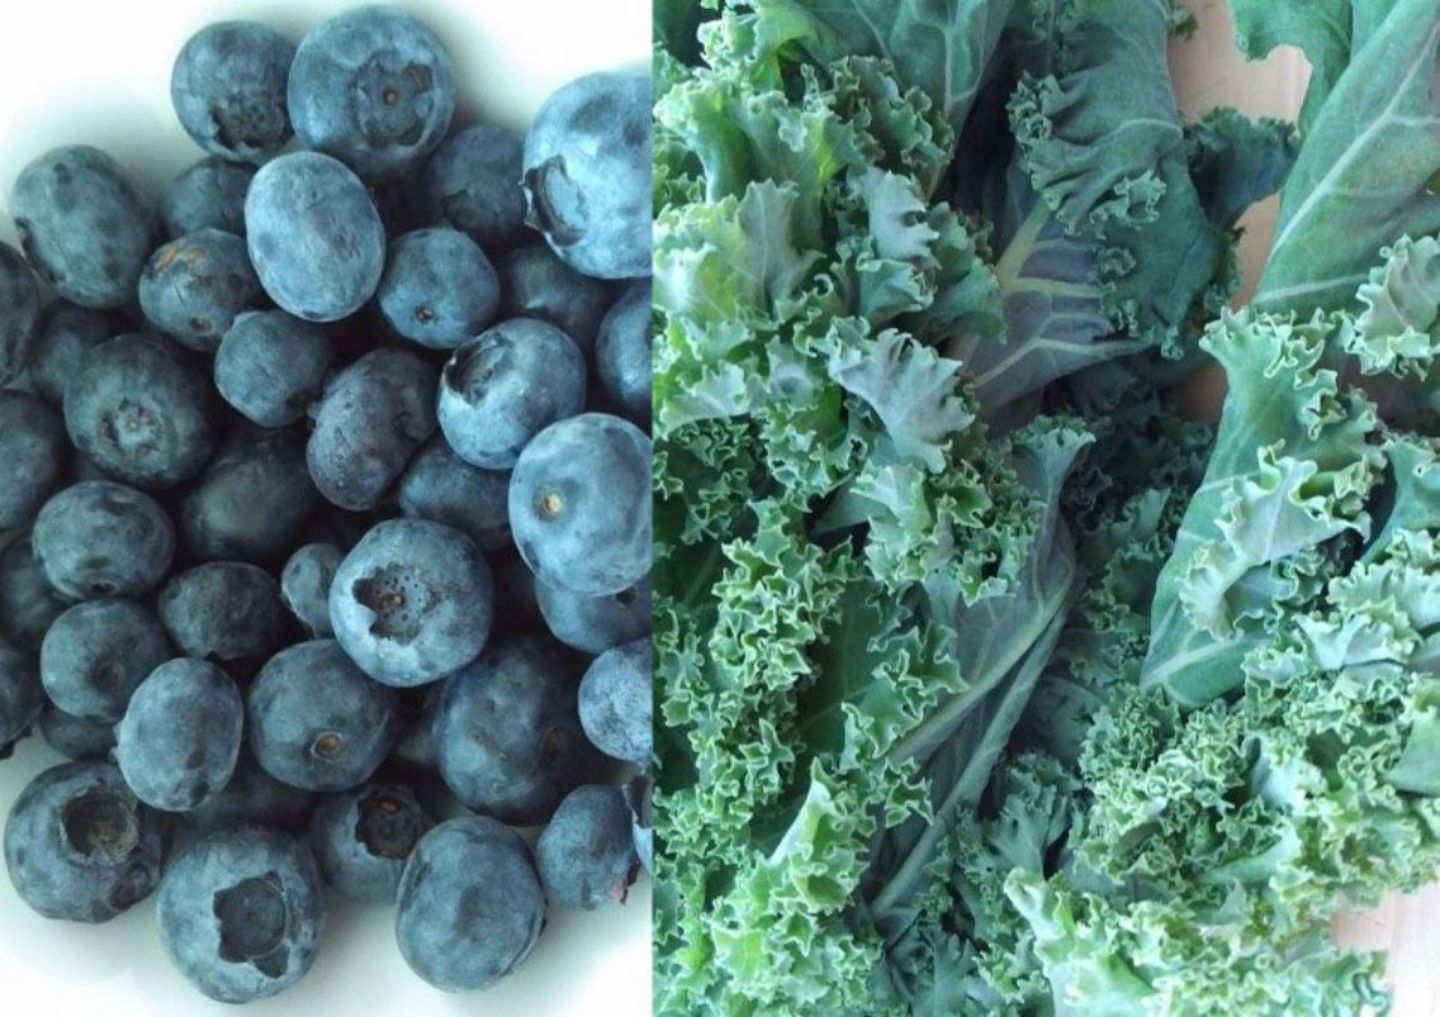 Kale and blueberries might not be the superfoods we are led to believe